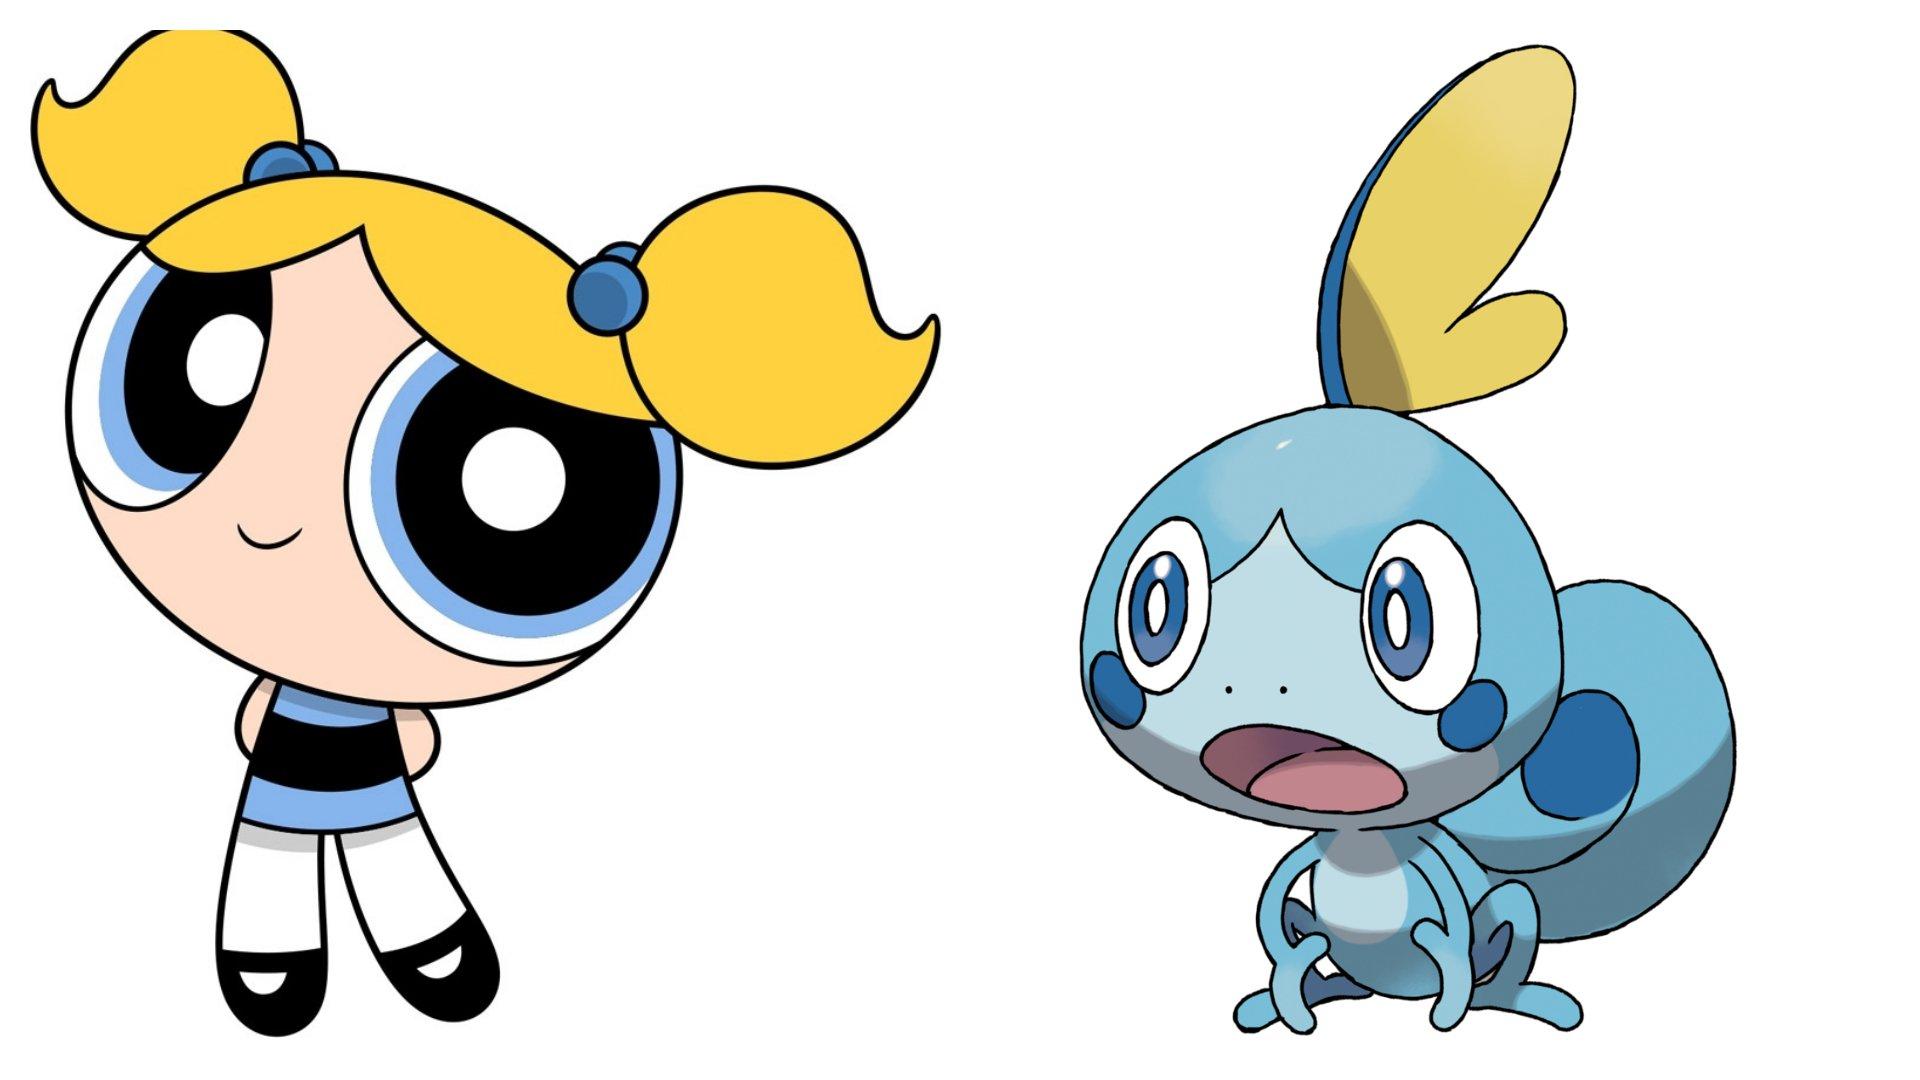 Oh Snap, Are the New Pokemon Starters Secretly the Powerpuff Girls?